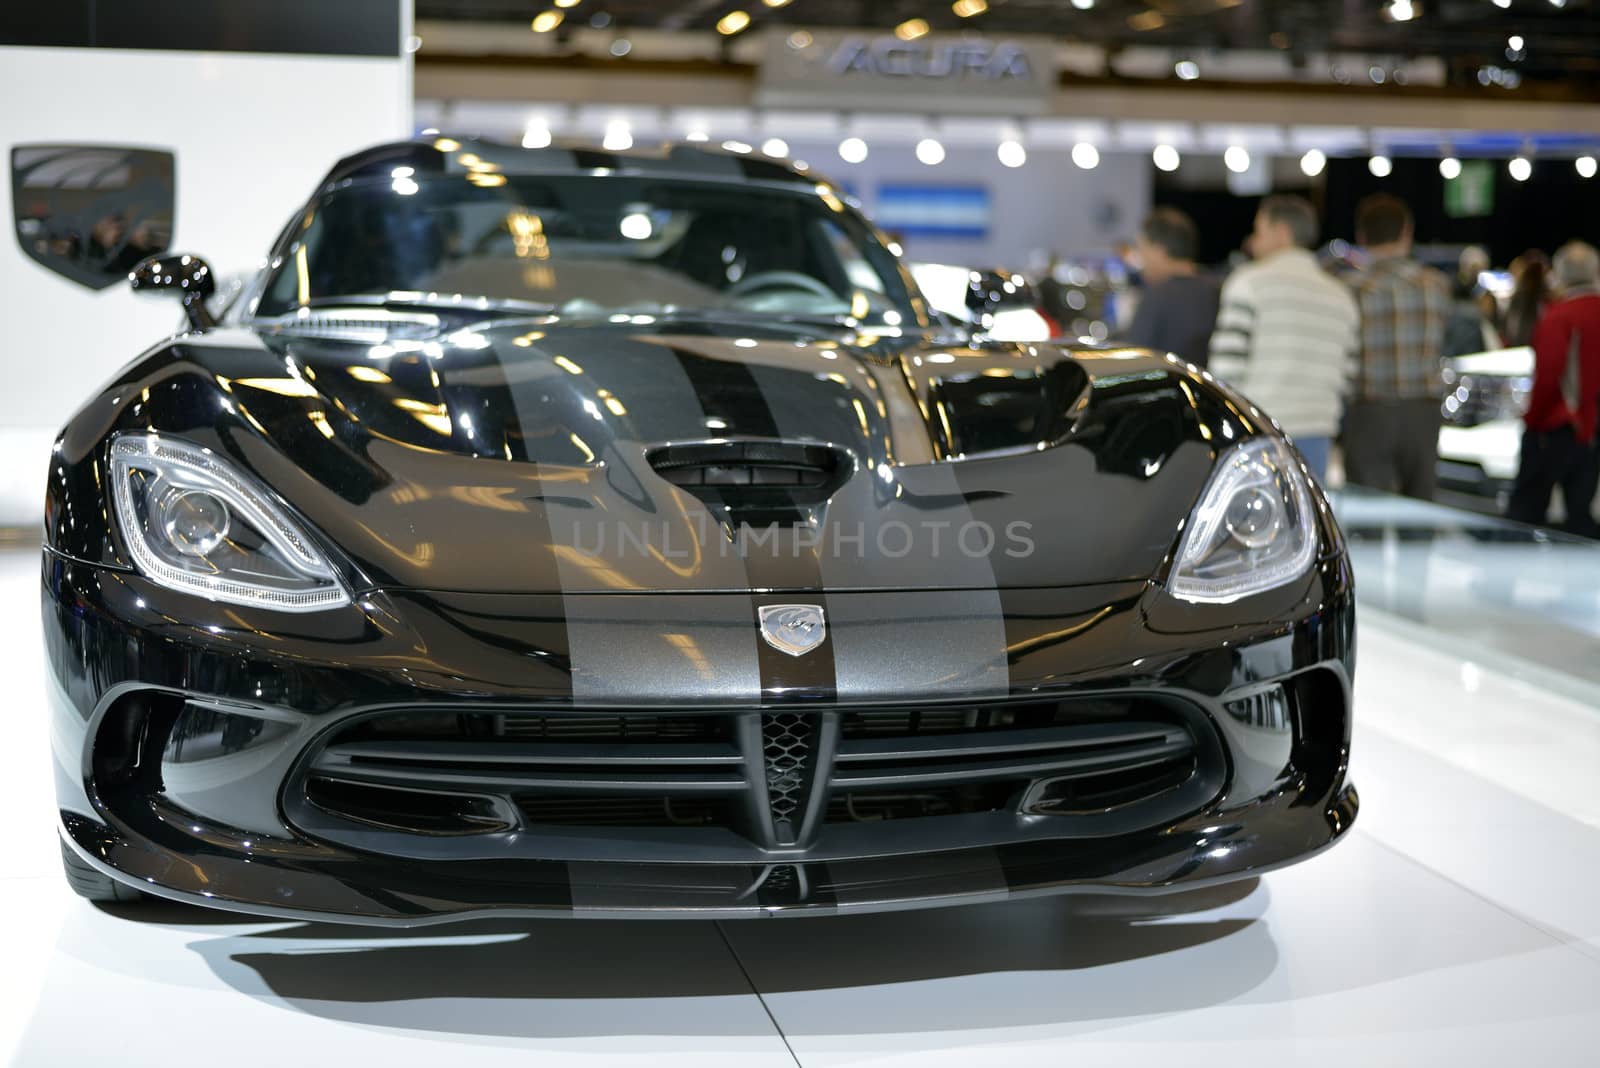 Dodge Viper SRT shown at The Montreal International Auto Show  at the Palais des Congres de Montreal 46th Edition